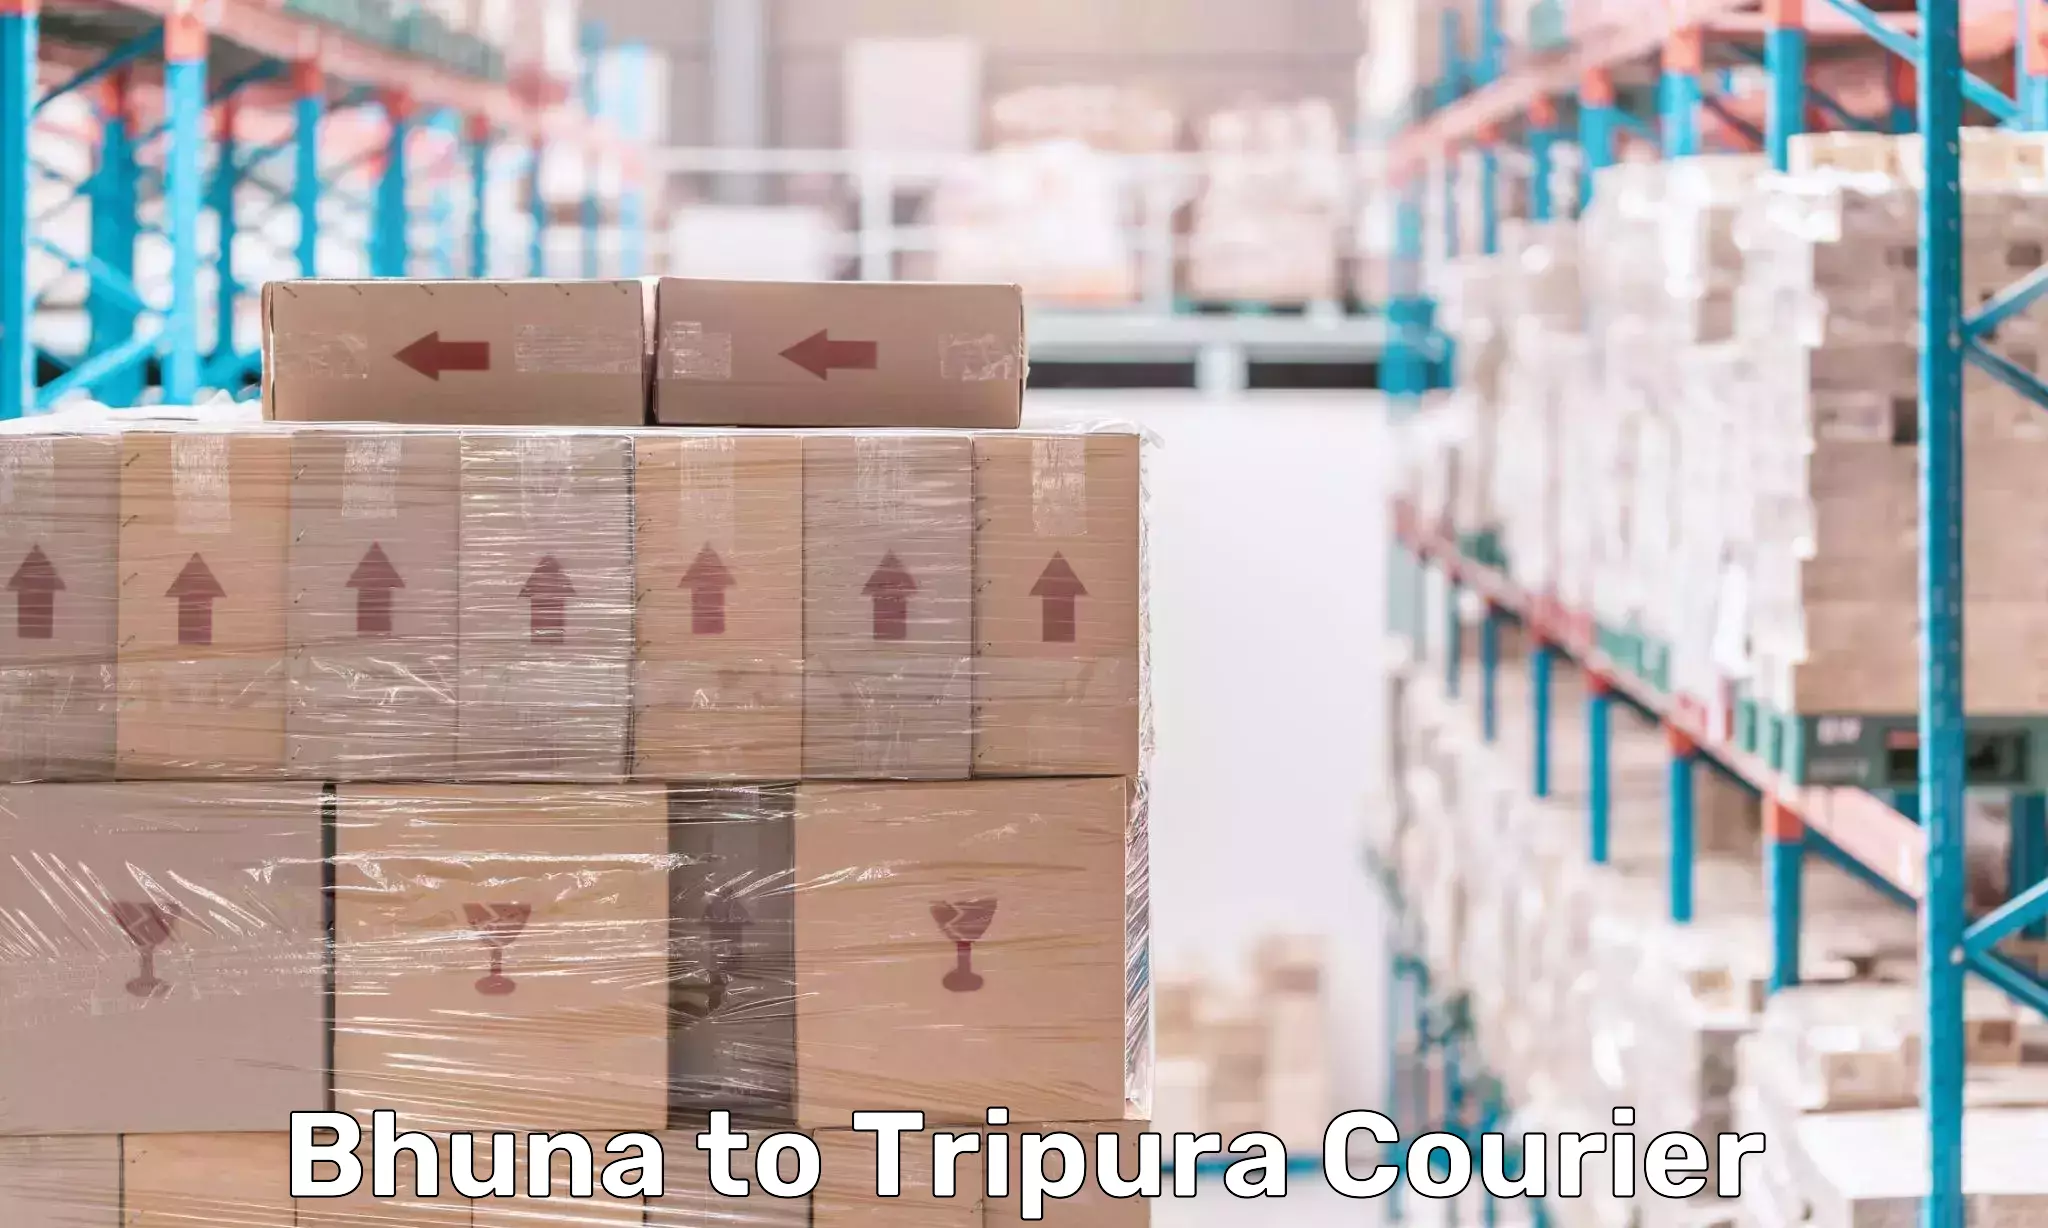 Courier service efficiency Bhuna to Udaipur Tripura